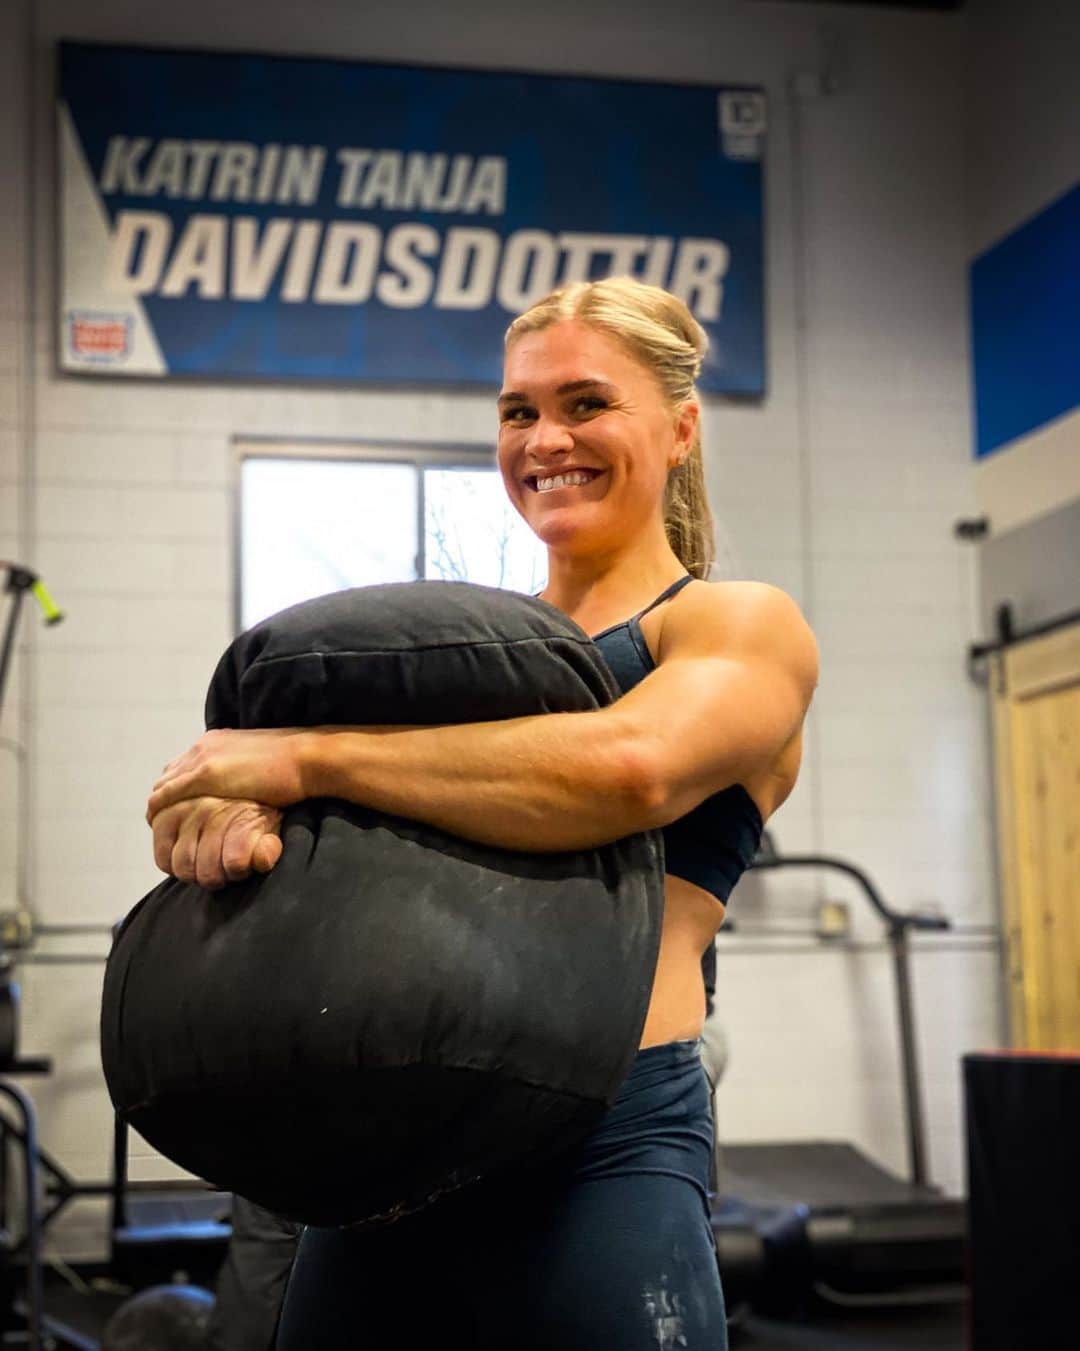 Katrin Tanja Davidsdottirのインスタグラム：「Wasn’t this good of a time for a very long time hehe .. // @roguefitness BEAR HUG CHALLENGE 💥🐻🤝 WHO’S IN? - How long do you think I can hold this 150lb sandbag for? Tell me your times in the comments if you attempt this! - If you want to participate go to www.roguefitness.com/challenge to register. All you need is a 200lb / 150lb sandbag & a whole lot of grit, grind & determination .. this comes down to who wants it the most 😎 challenge runs through mon feb 15th. (Link in my bio & link in swipe up in my stories) - Good luck. Have fun. Happy saturday everyone! xxx」